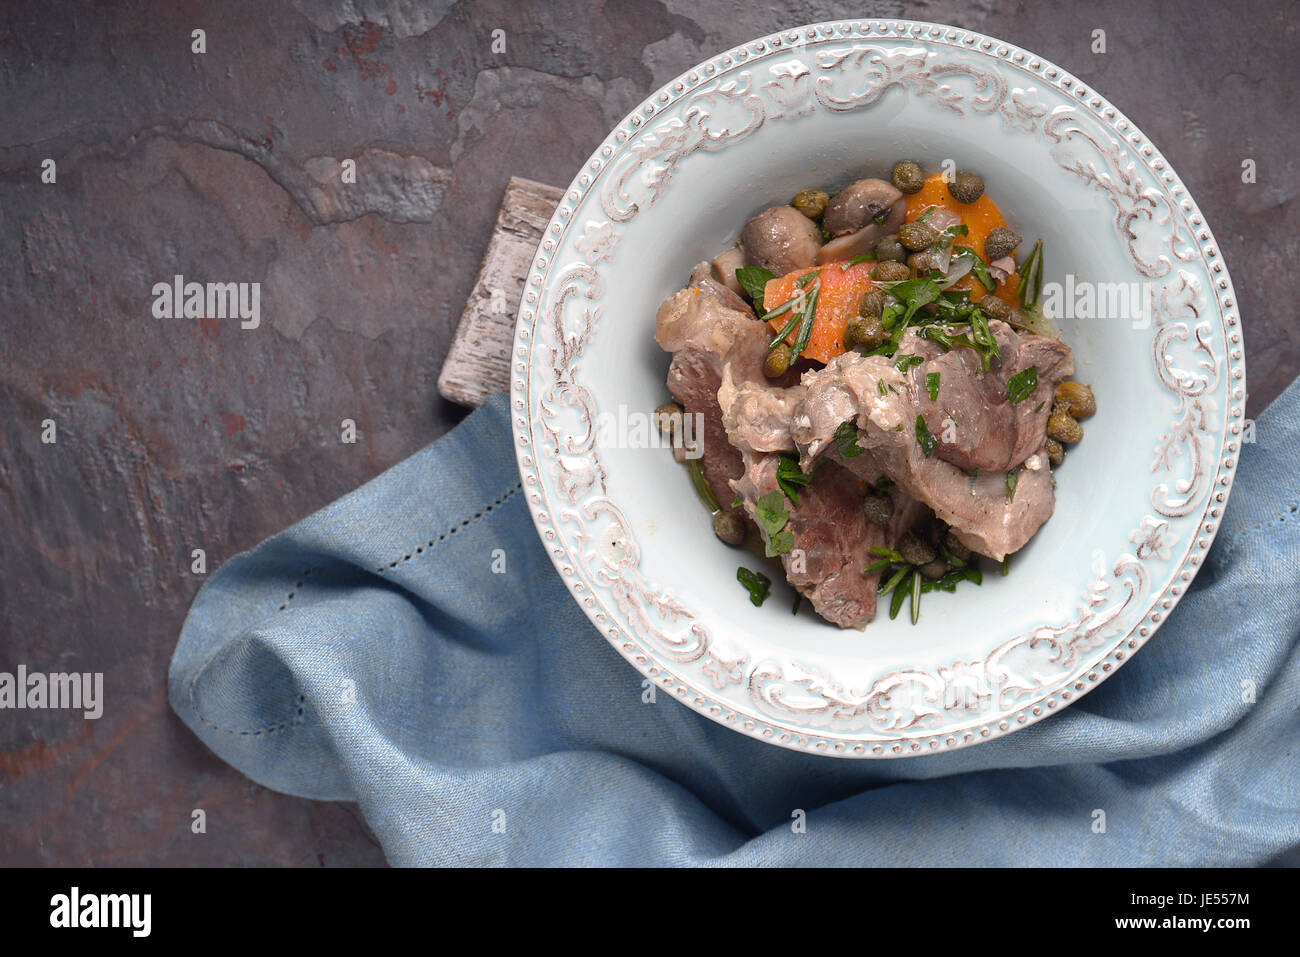 Meat blanquette in the ceramic plate on the stone background horizontal Stock Photo